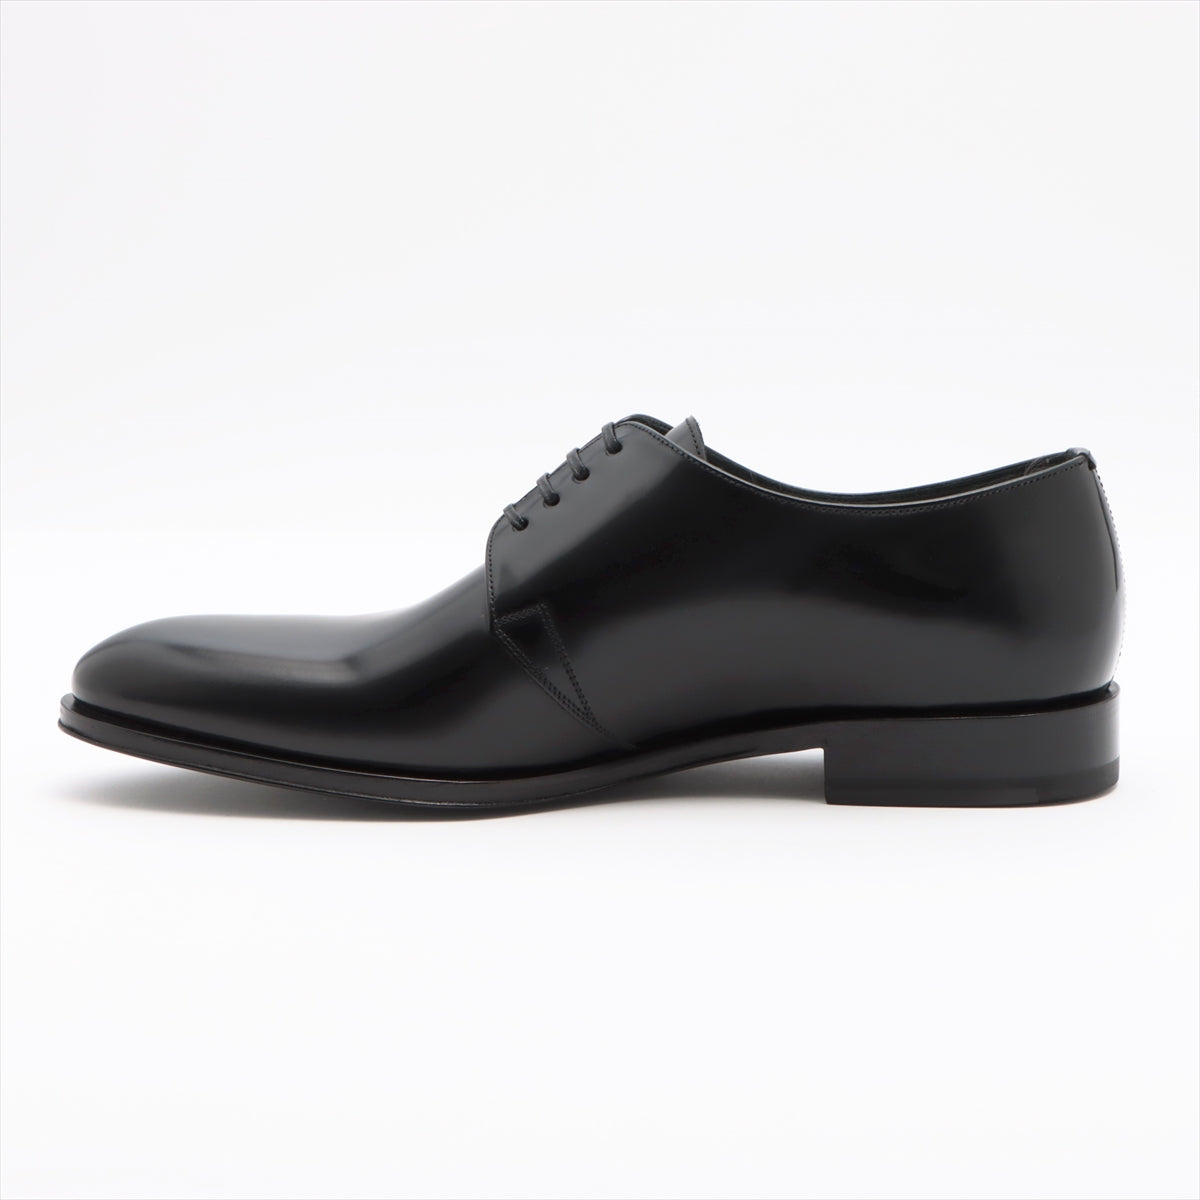 DIOR HOMME Leather Leather shoes 40 Men's Black box sack There is a replacement string